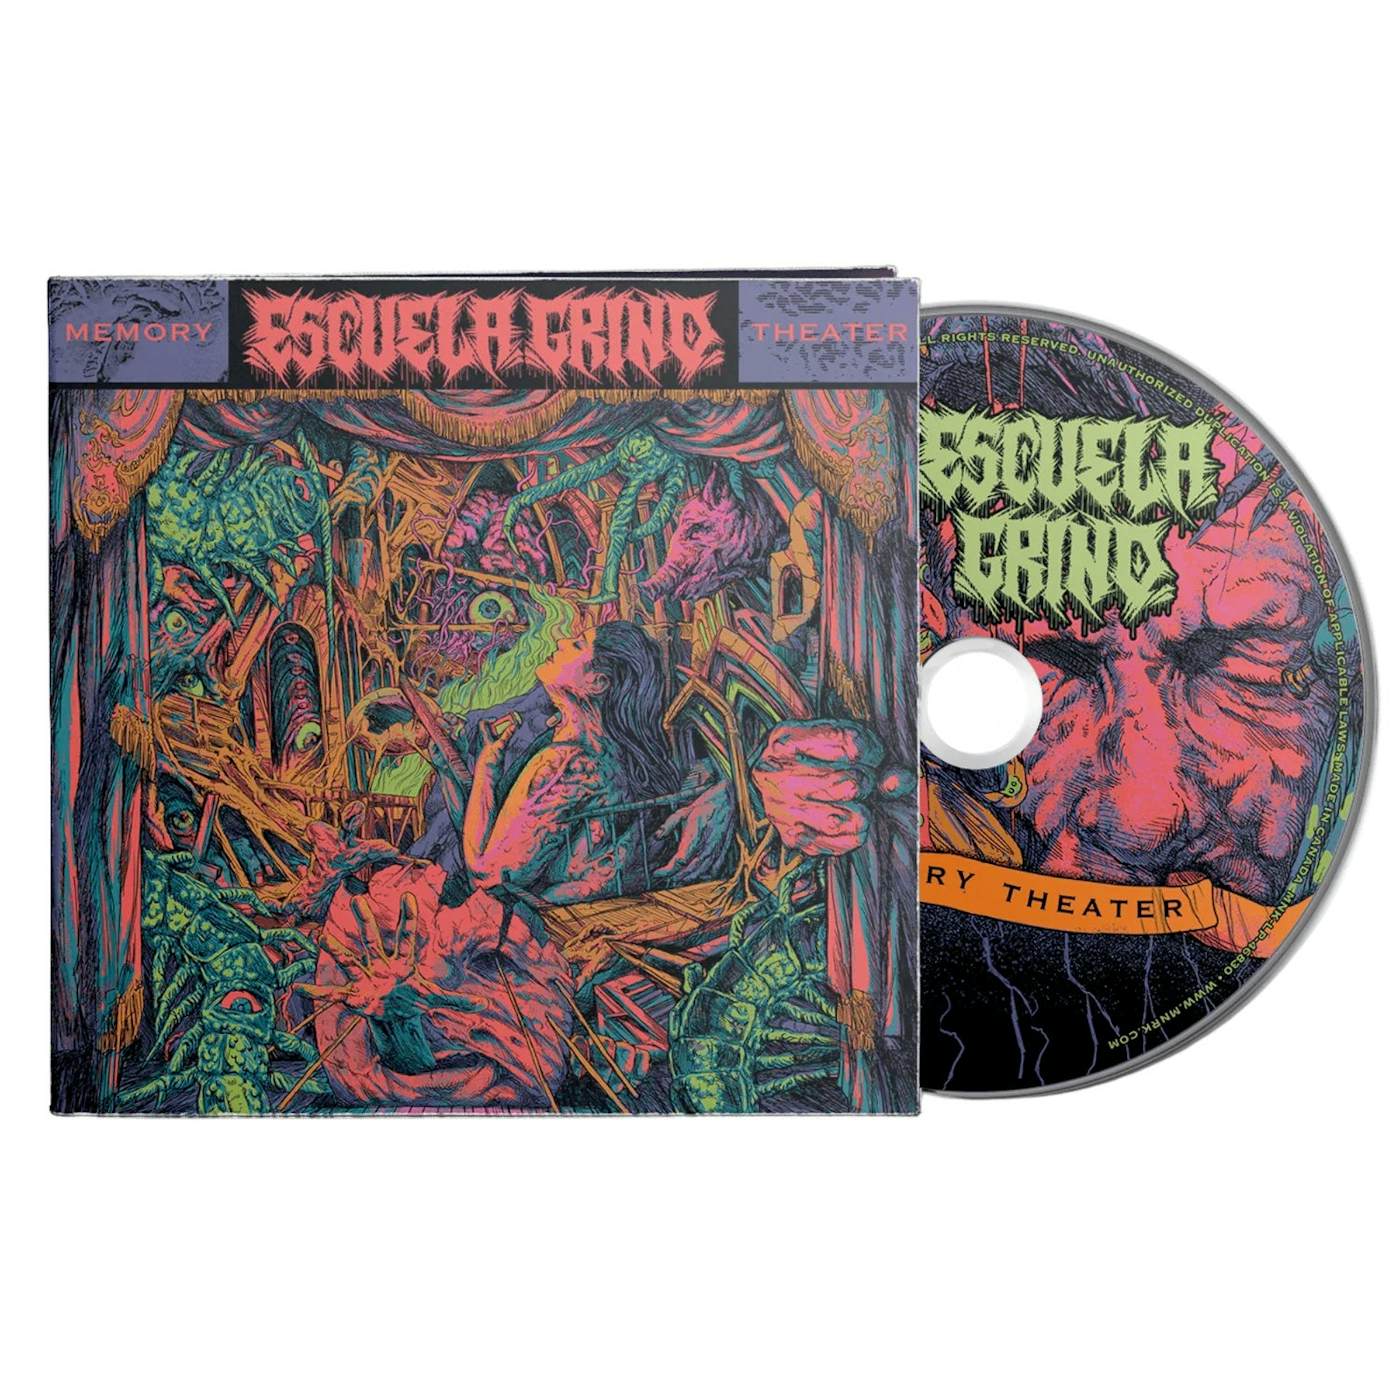 Escuela Grind "Memory Theater" CD